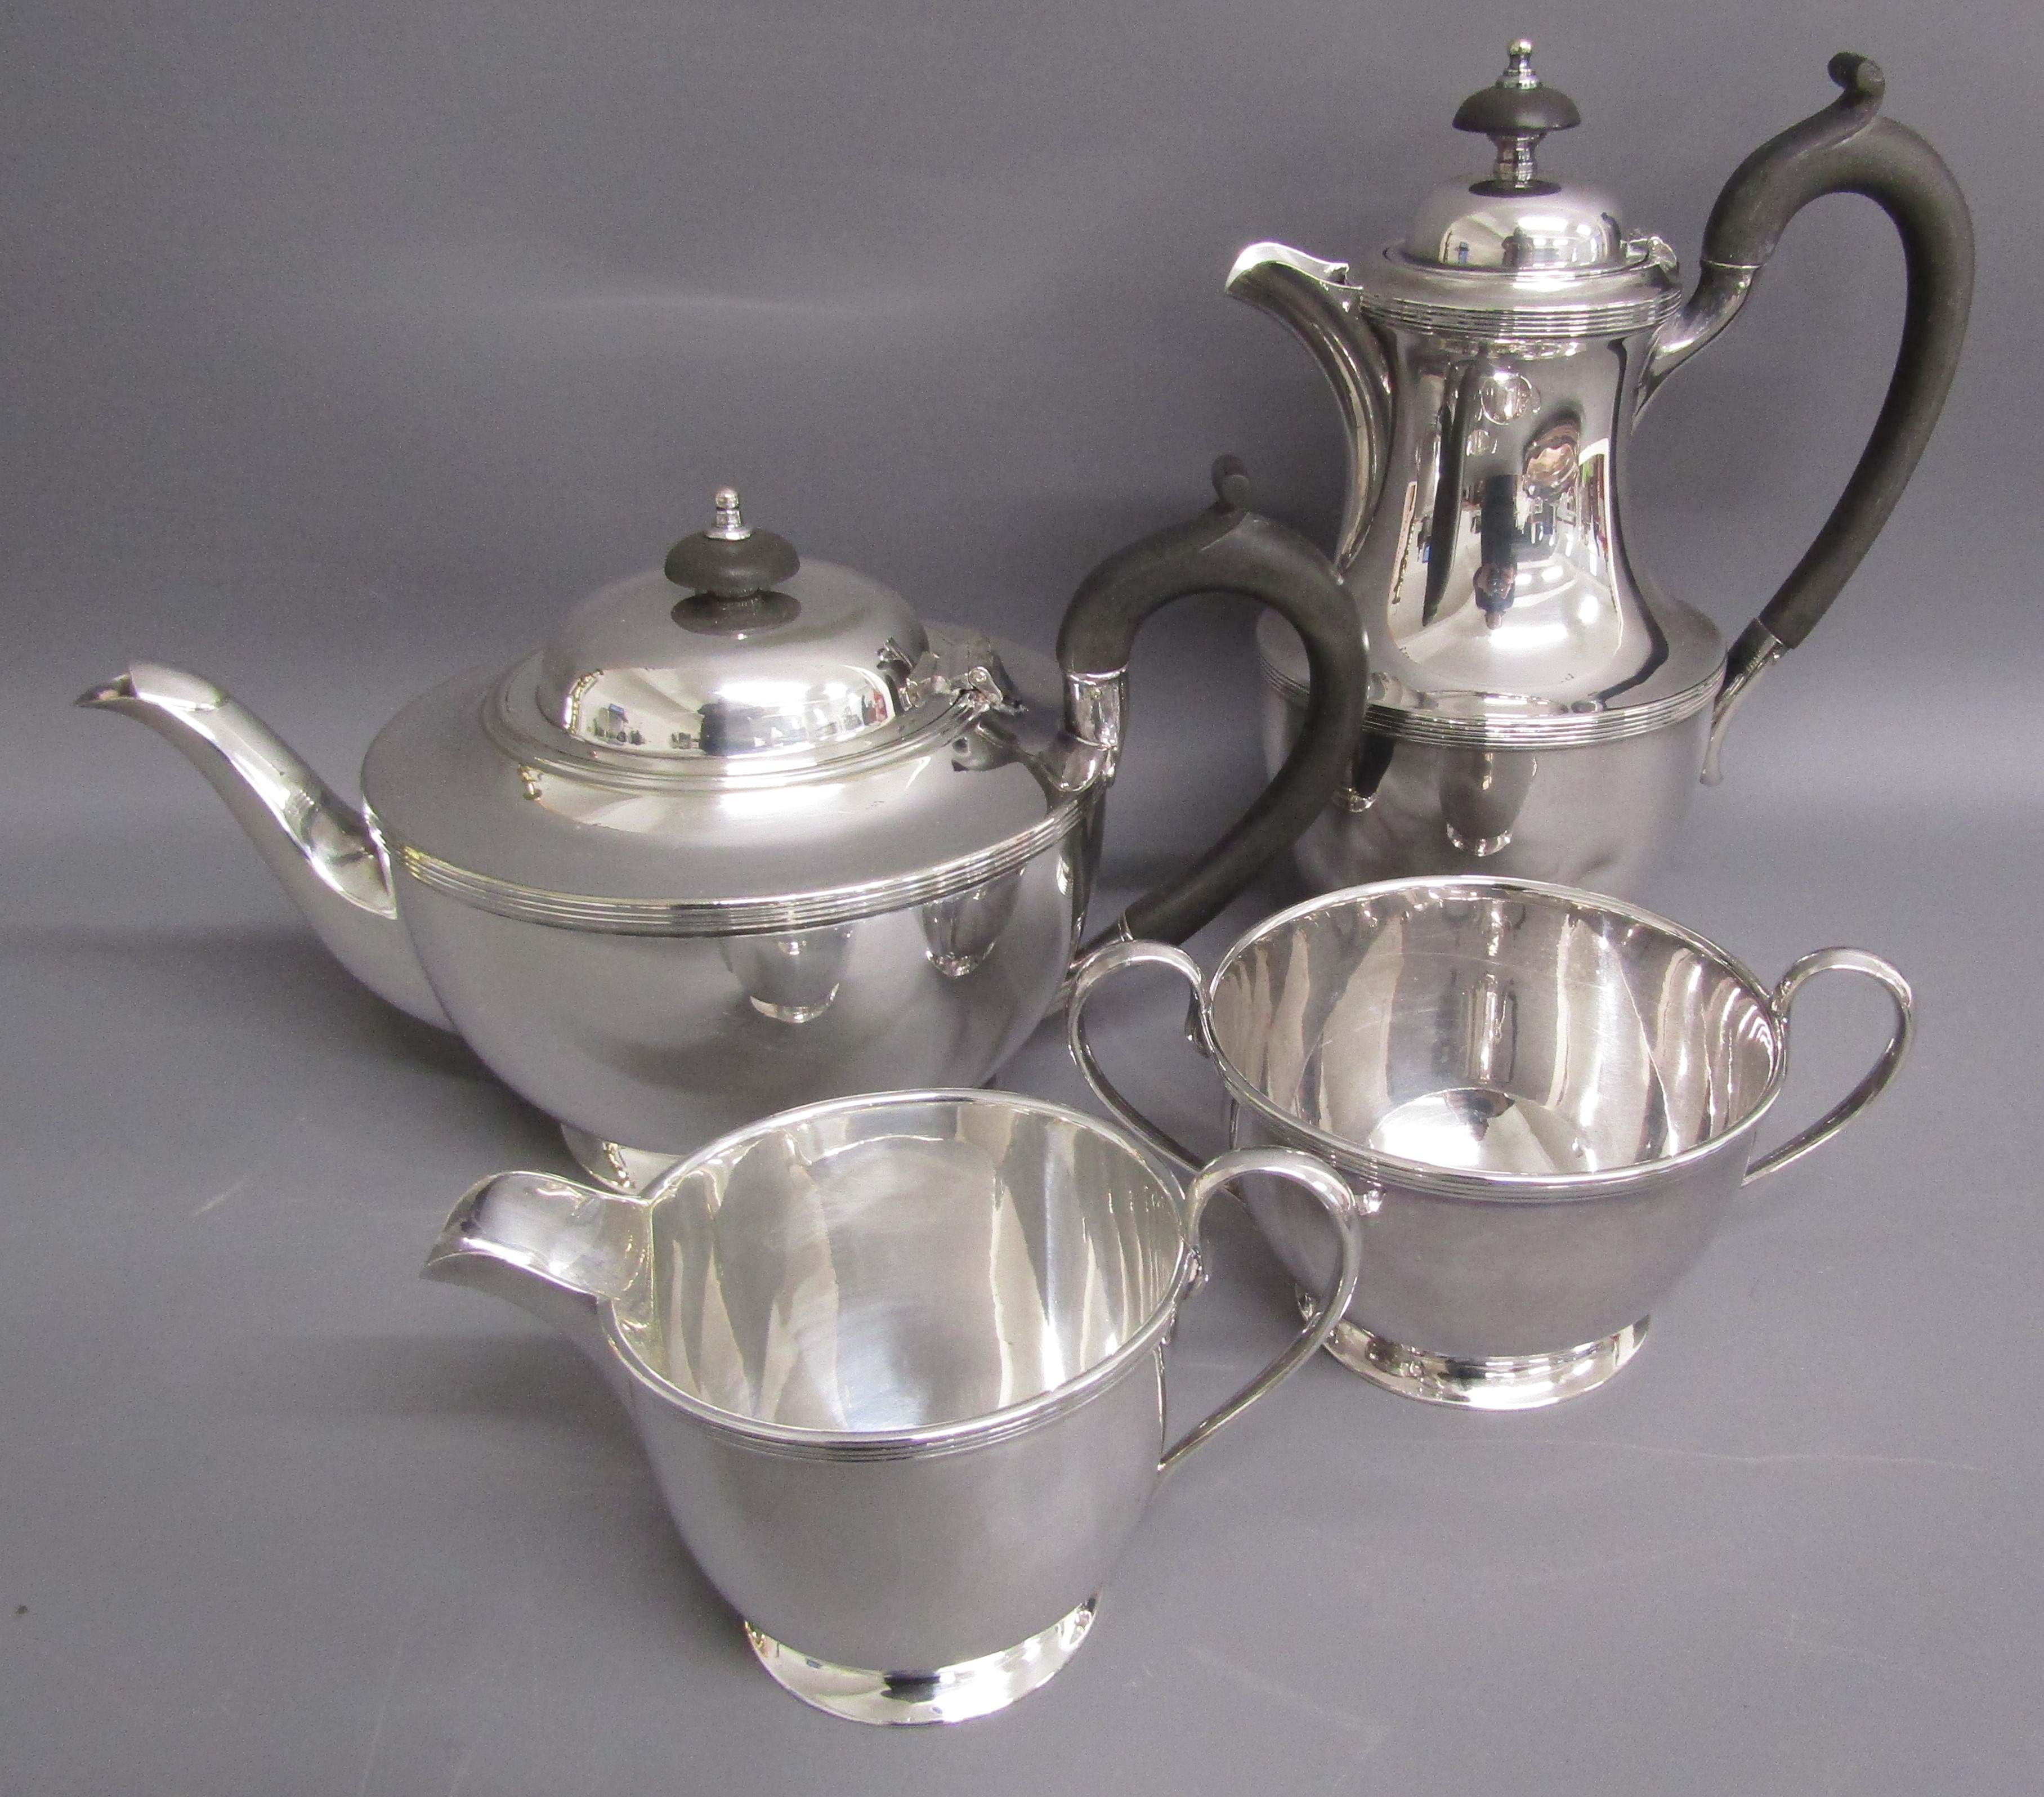 Harrison Brothers silver plate tea set, large silver on copper tray and pair of brass candlesticks - Image 3 of 3